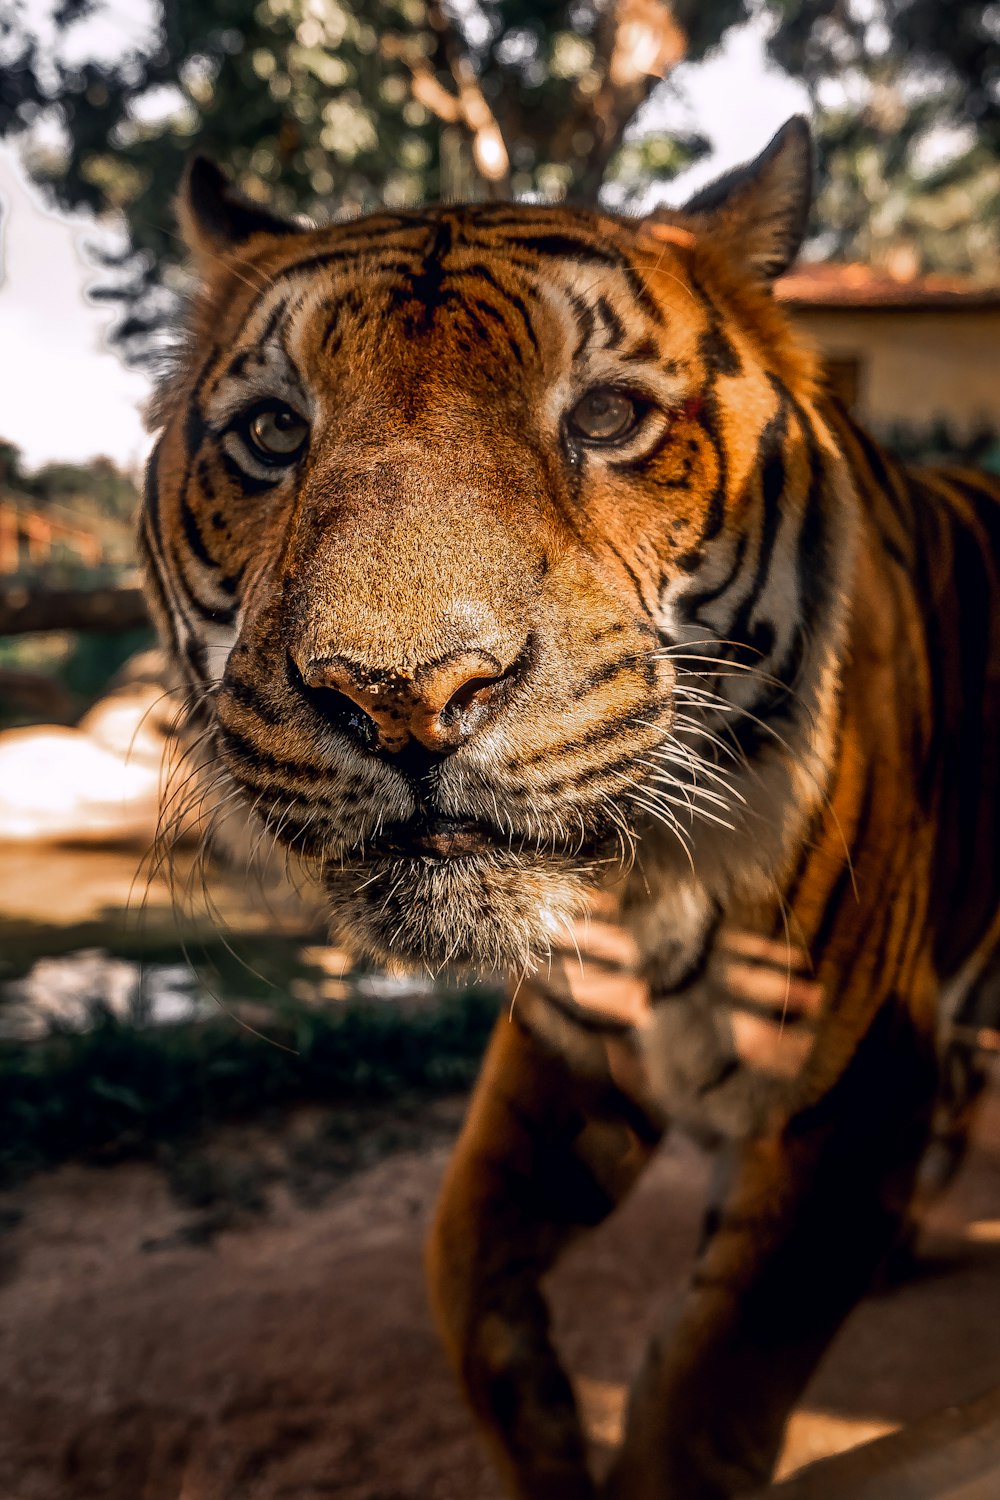 a close up of a tiger on a dirt ground